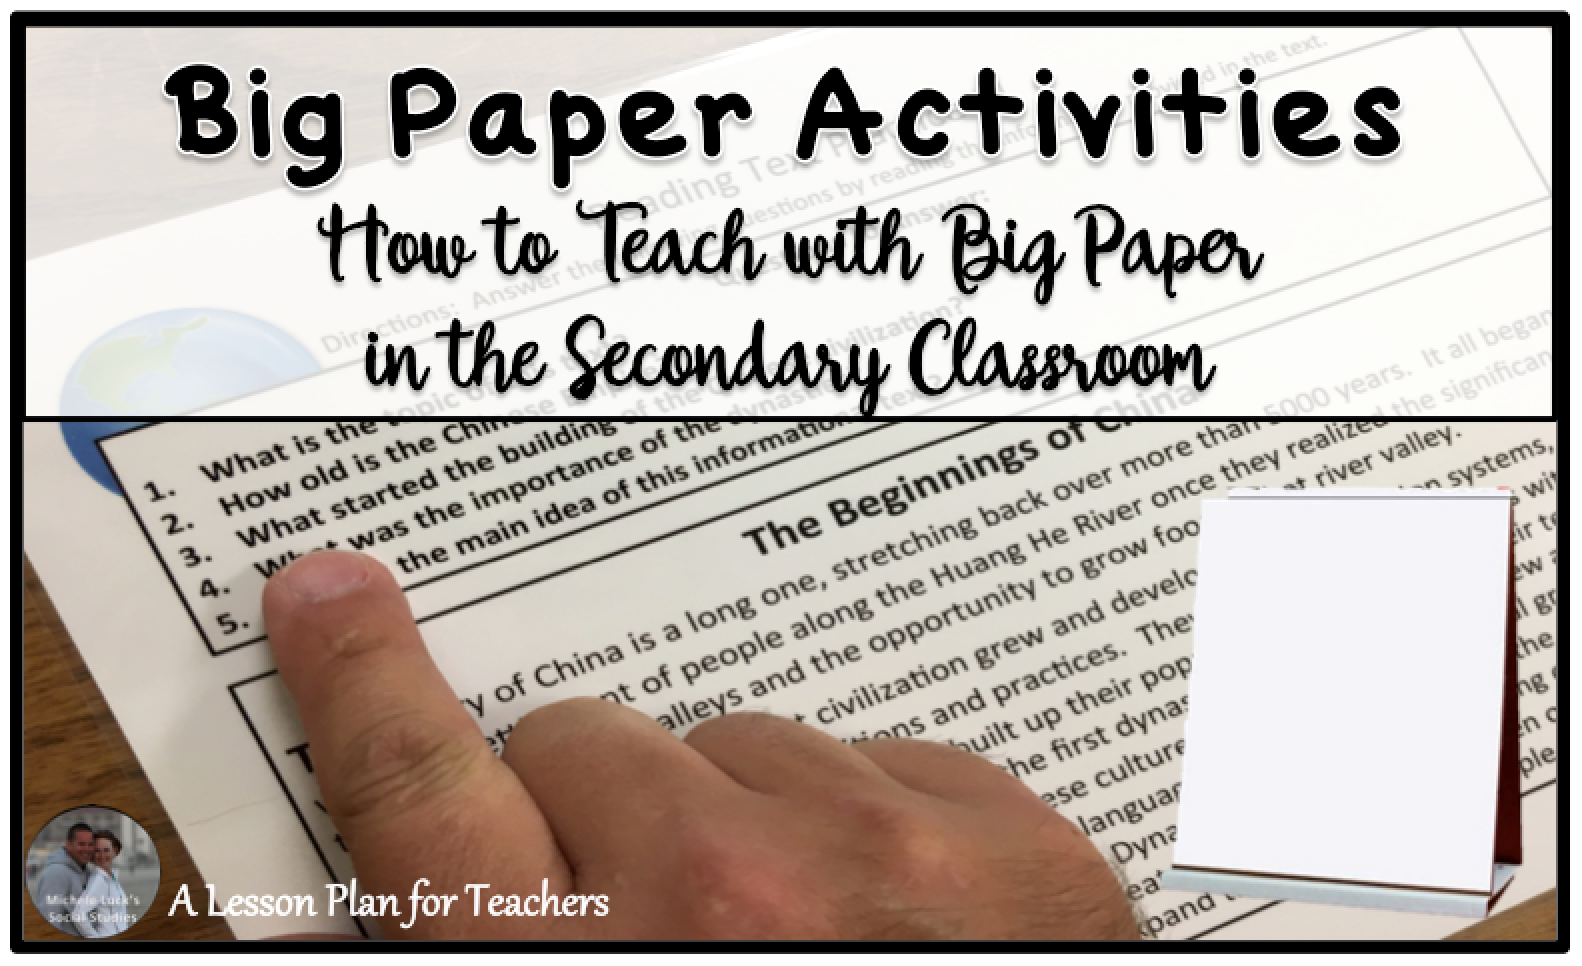 How to Teach with Big Paper in the Secondary Classroom - A Lesson